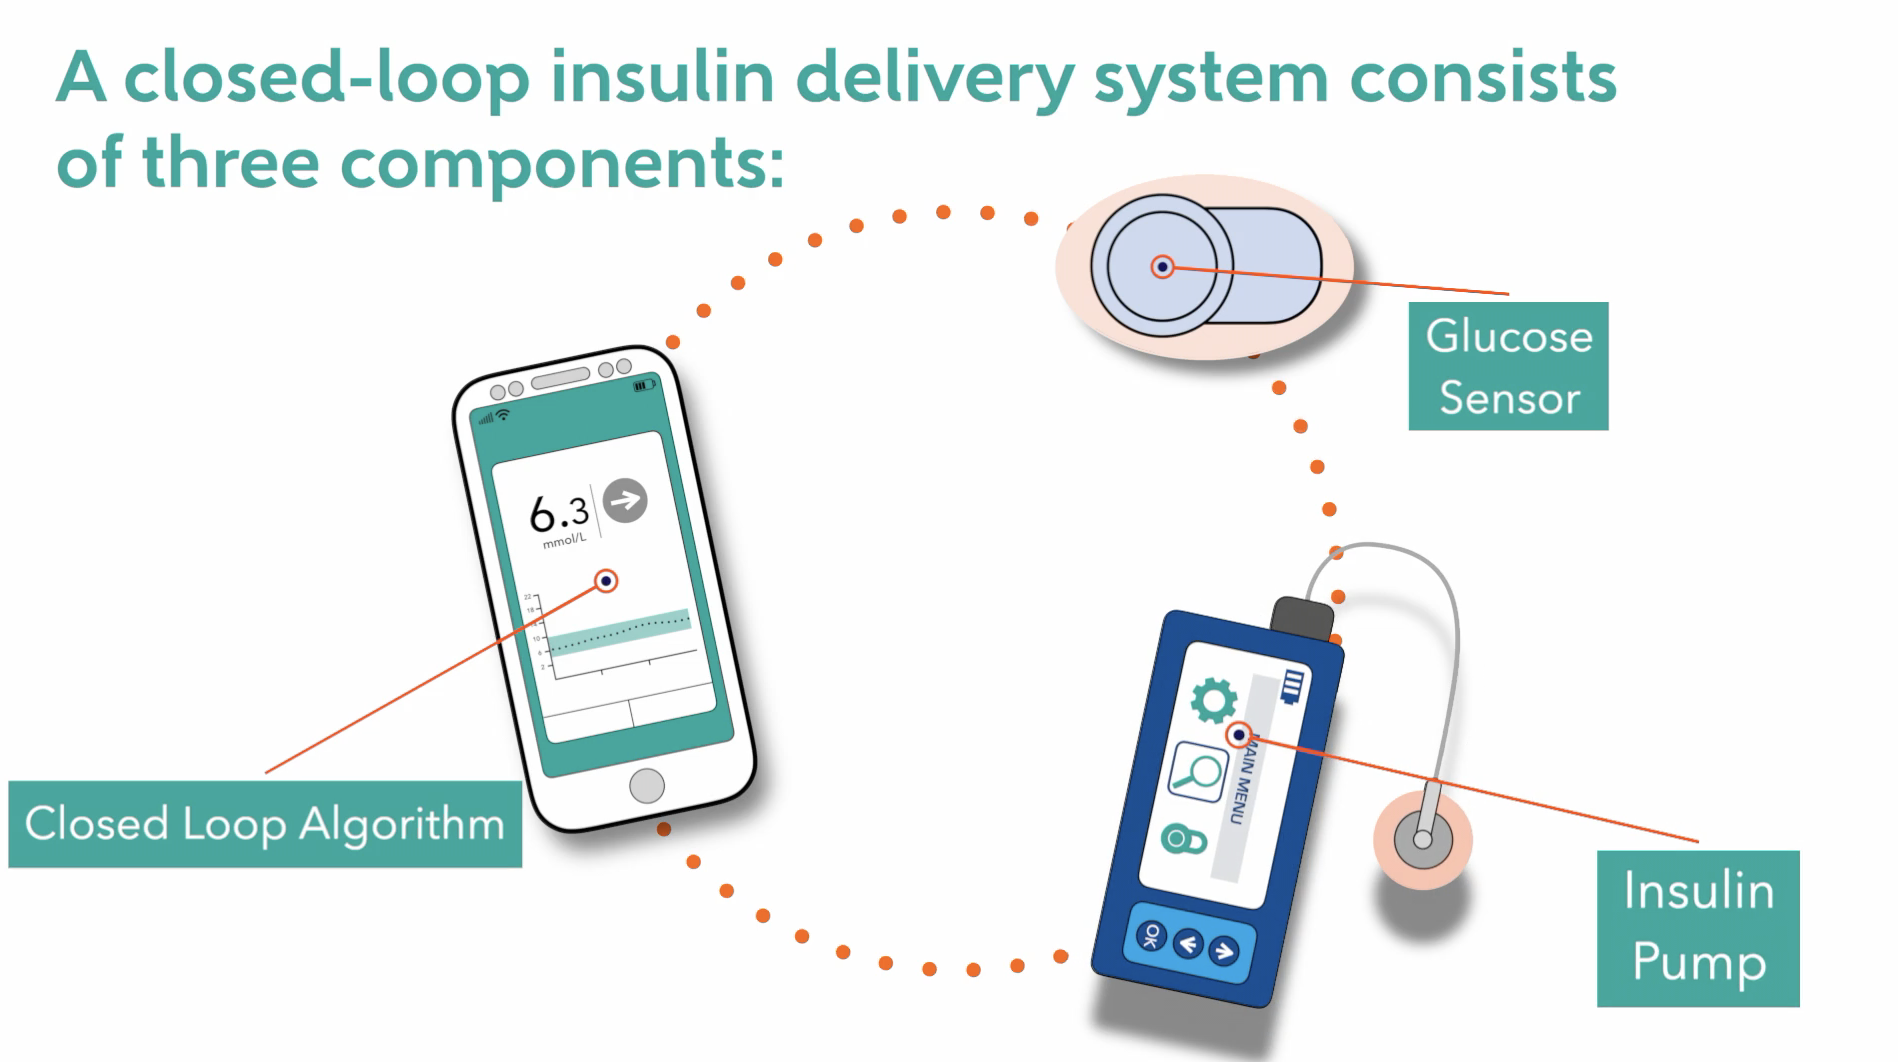 KidsAP Study Shows Huge Benefit with Closed-Loop System for Children's Diabetes Self-Management